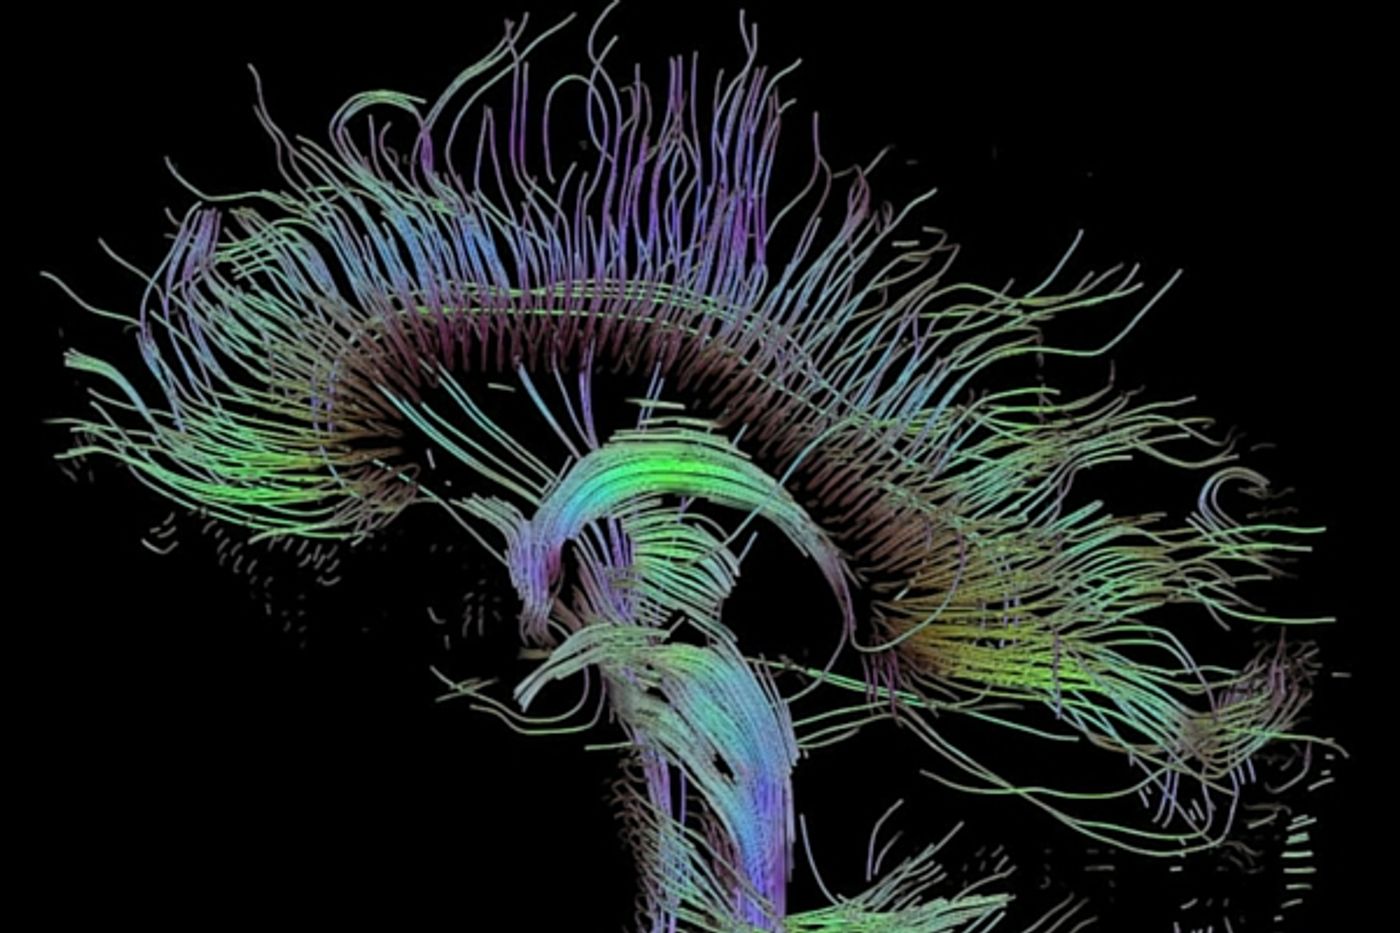 A certain kind of high tech MRI can see brain structures better